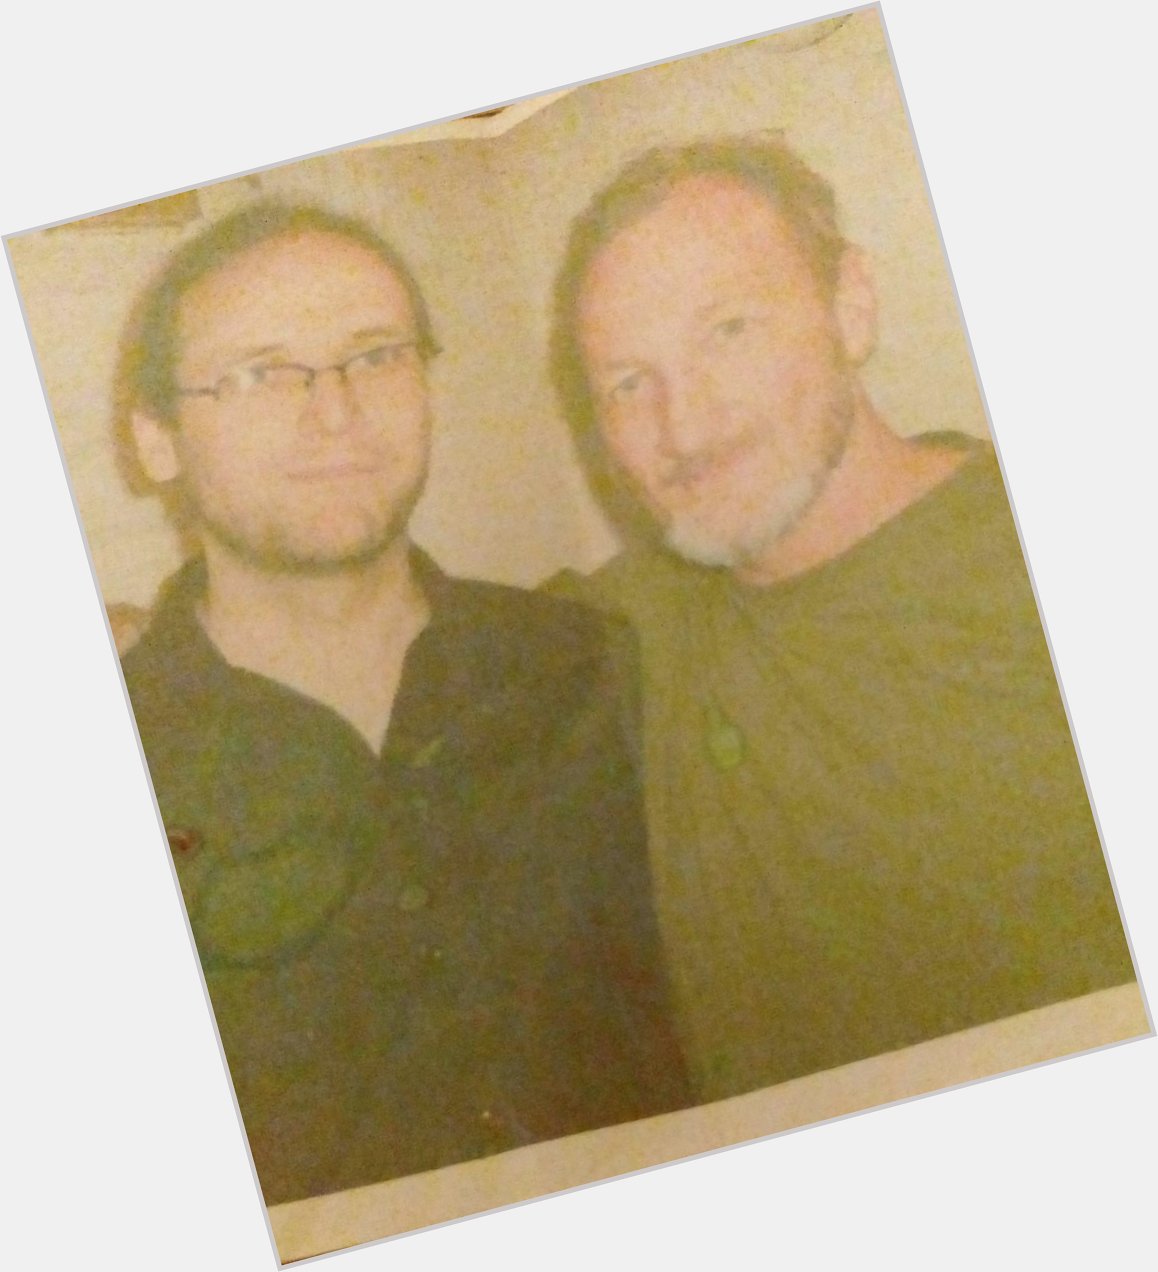 Really bad quality picture of myself and Robert Englund..
Happy birthday Freddy. 